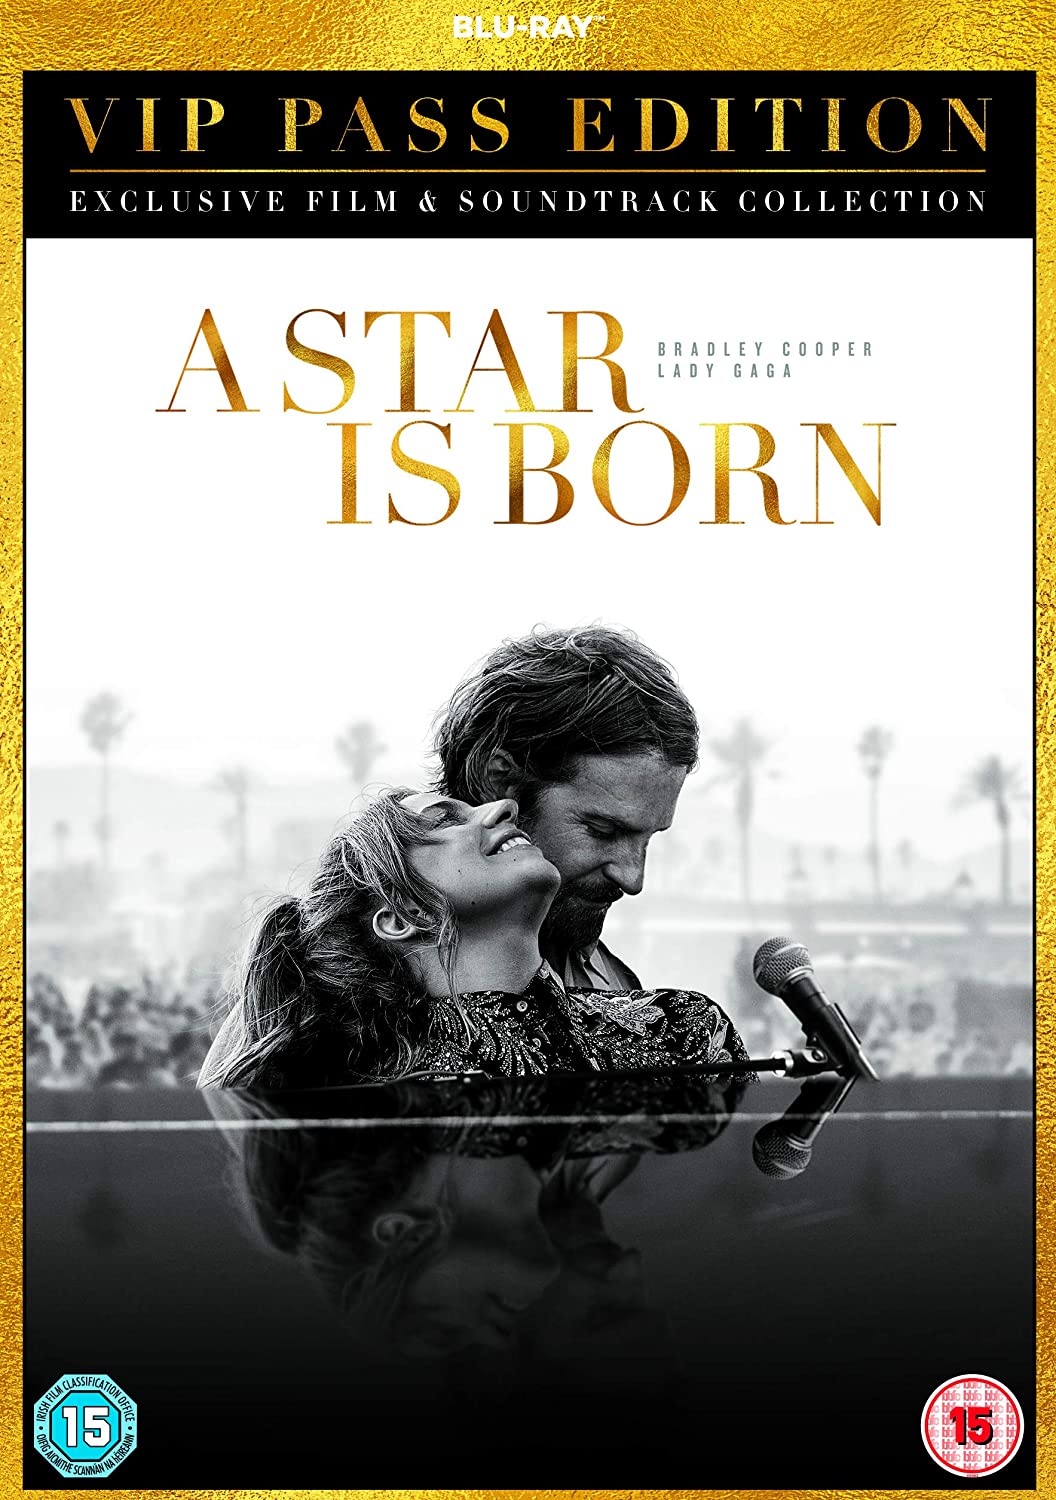 A Star is Born (2018) - VIP Pass Edition